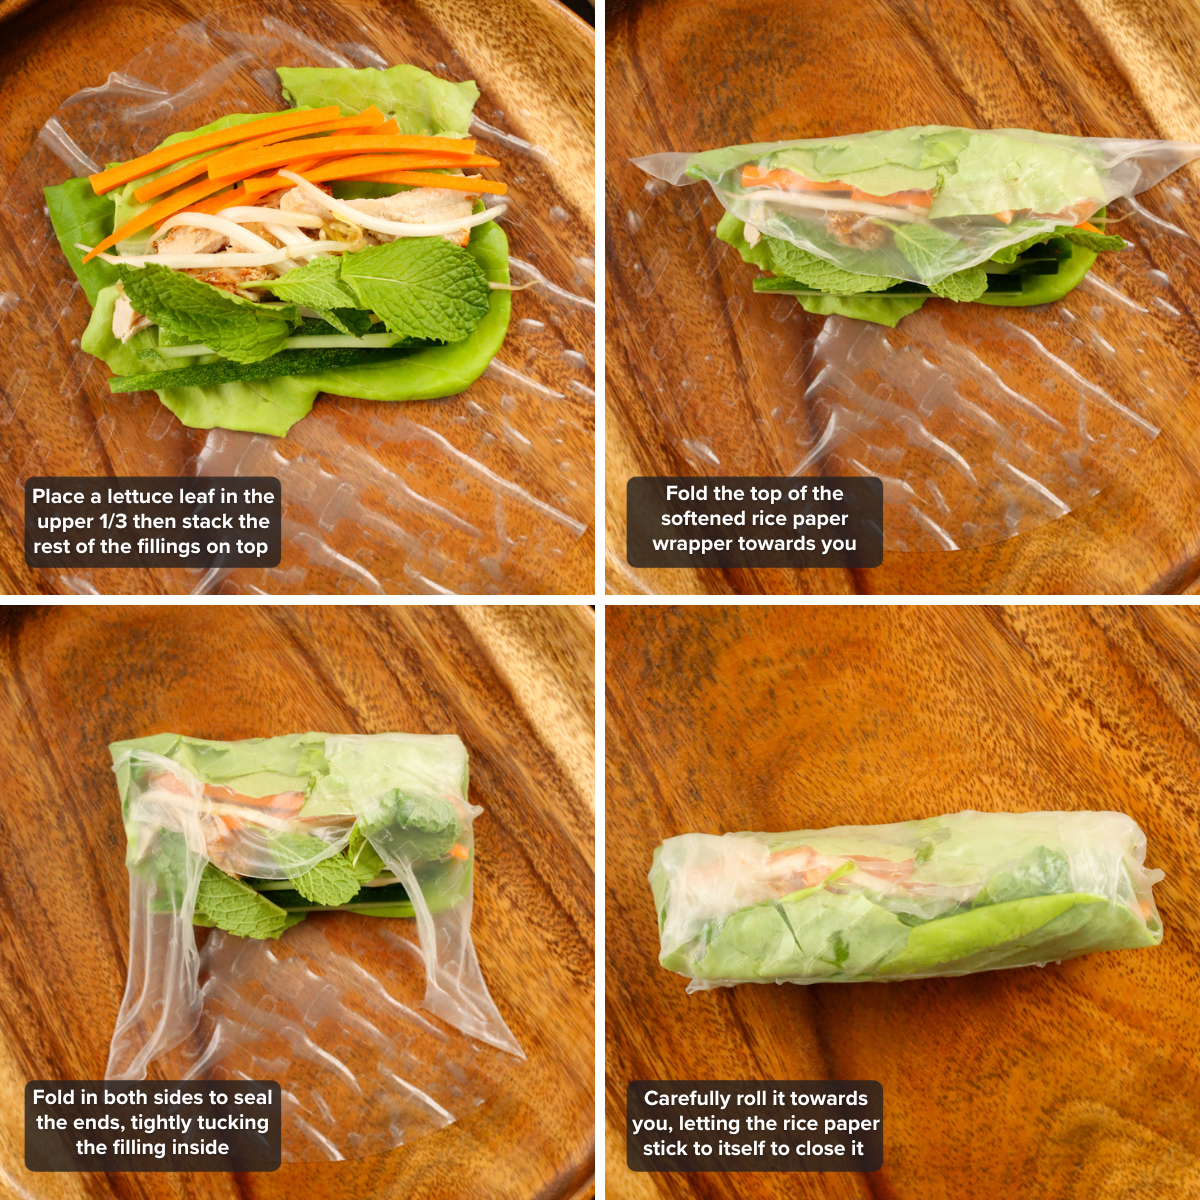 A grid of 4 images showing the steps for rolling homemade spring rolls, starting with placing the fillings in the upper portion of the wrapper, folding it over, tucking both sides to seal it, and rolling it tightly towards your body. White text on a semi transparent black background appears in the lower left corner of each images